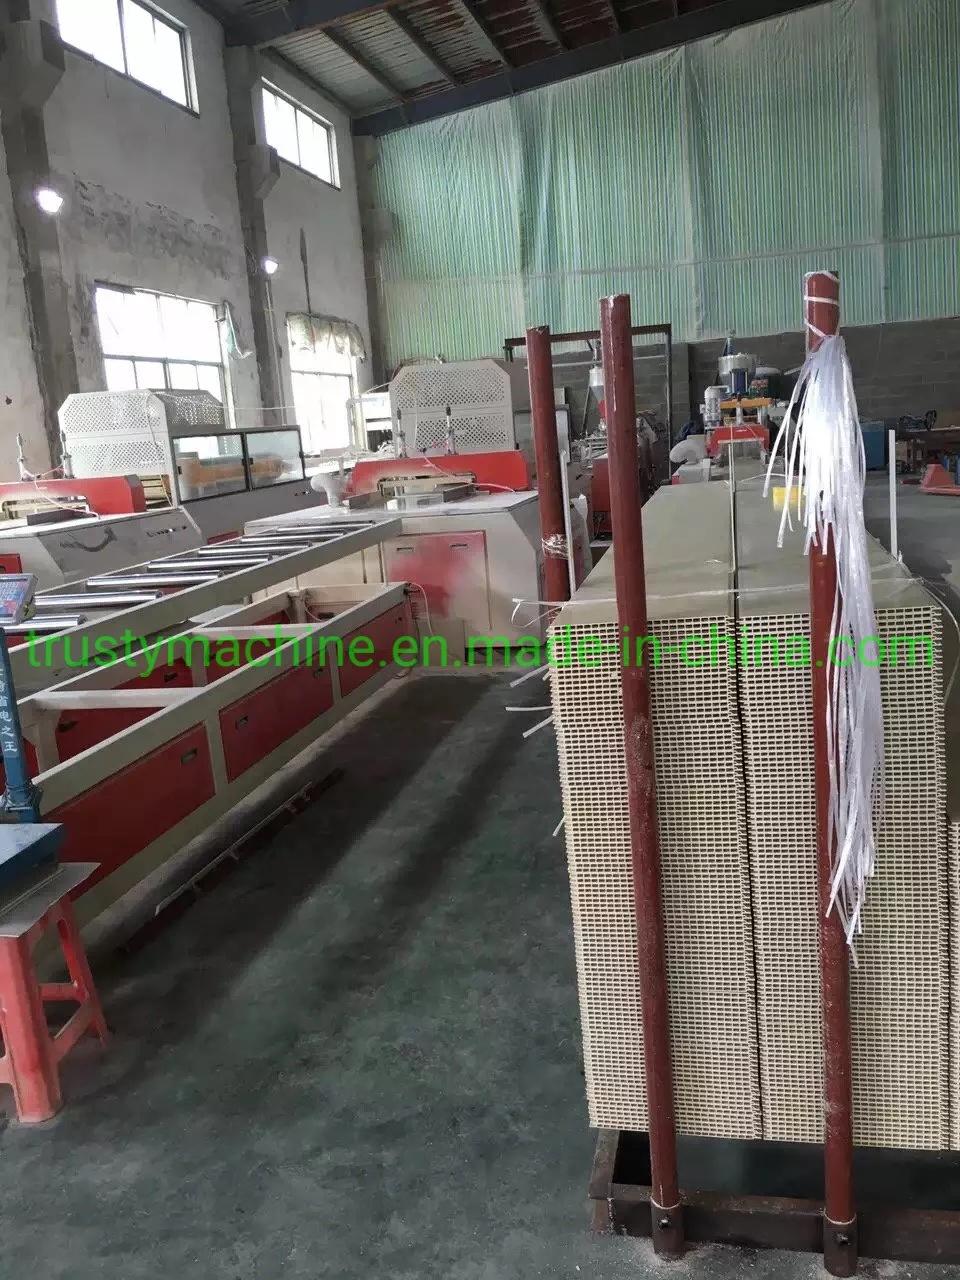 PVC/WPC Decoration Wall Board/Panel Ceiling Panel Extrusion Production Line